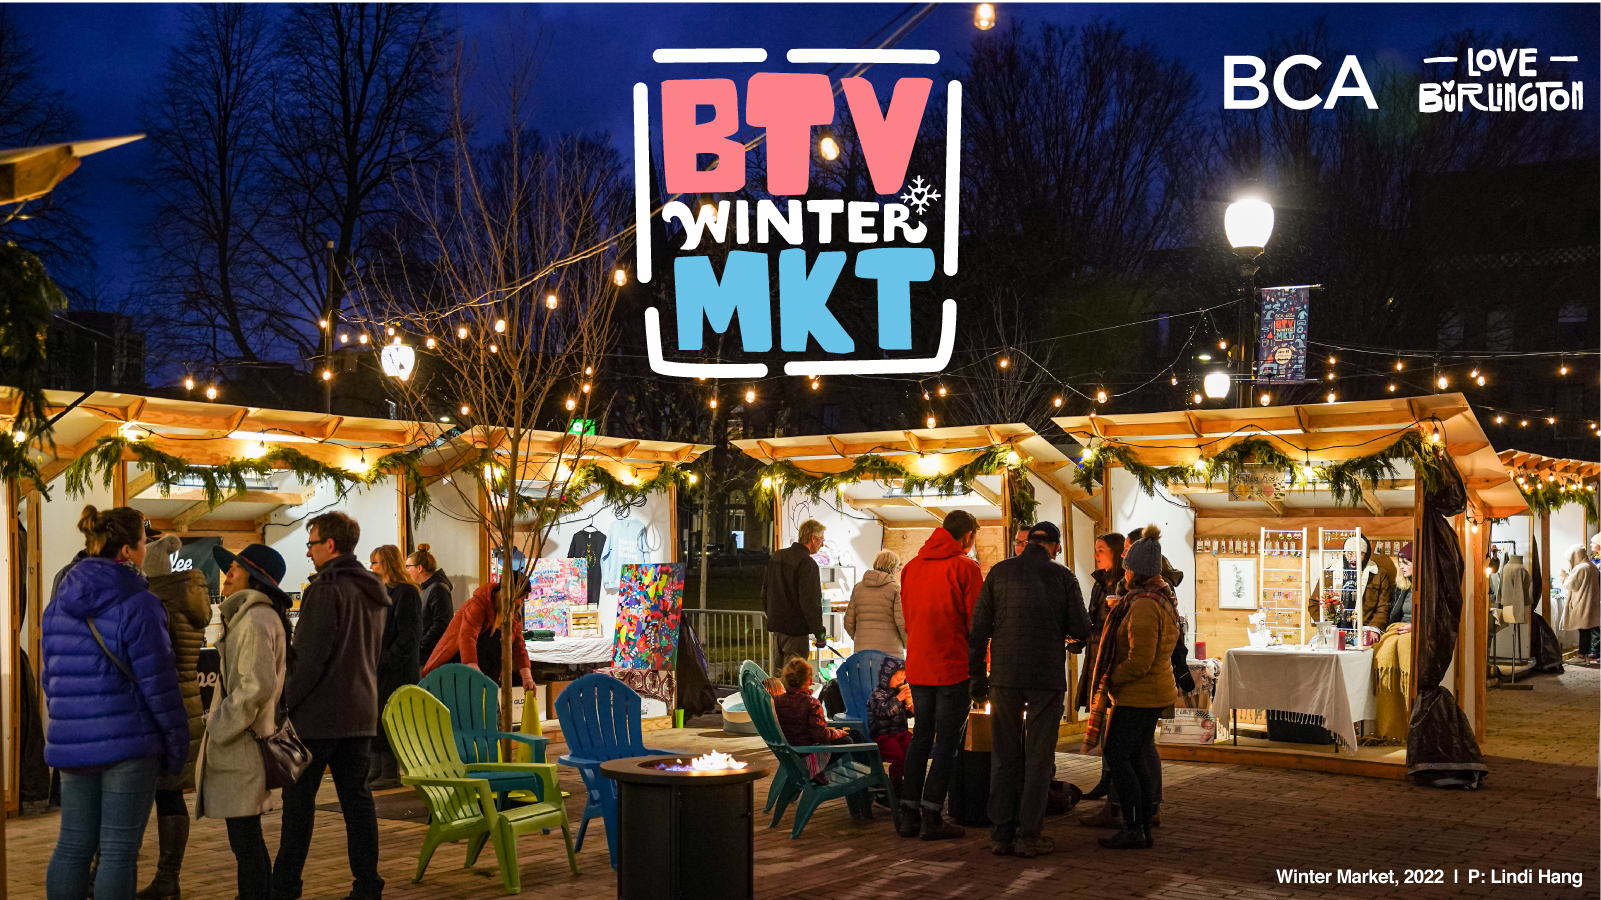 BTV Winter Market, BCA Love Burlington over a photograph of an outdoor market at dusk, with people milling about wooden sheds decorated with evergreen garlands and twinkly lights and blue and green adirondack chairs around firepits  